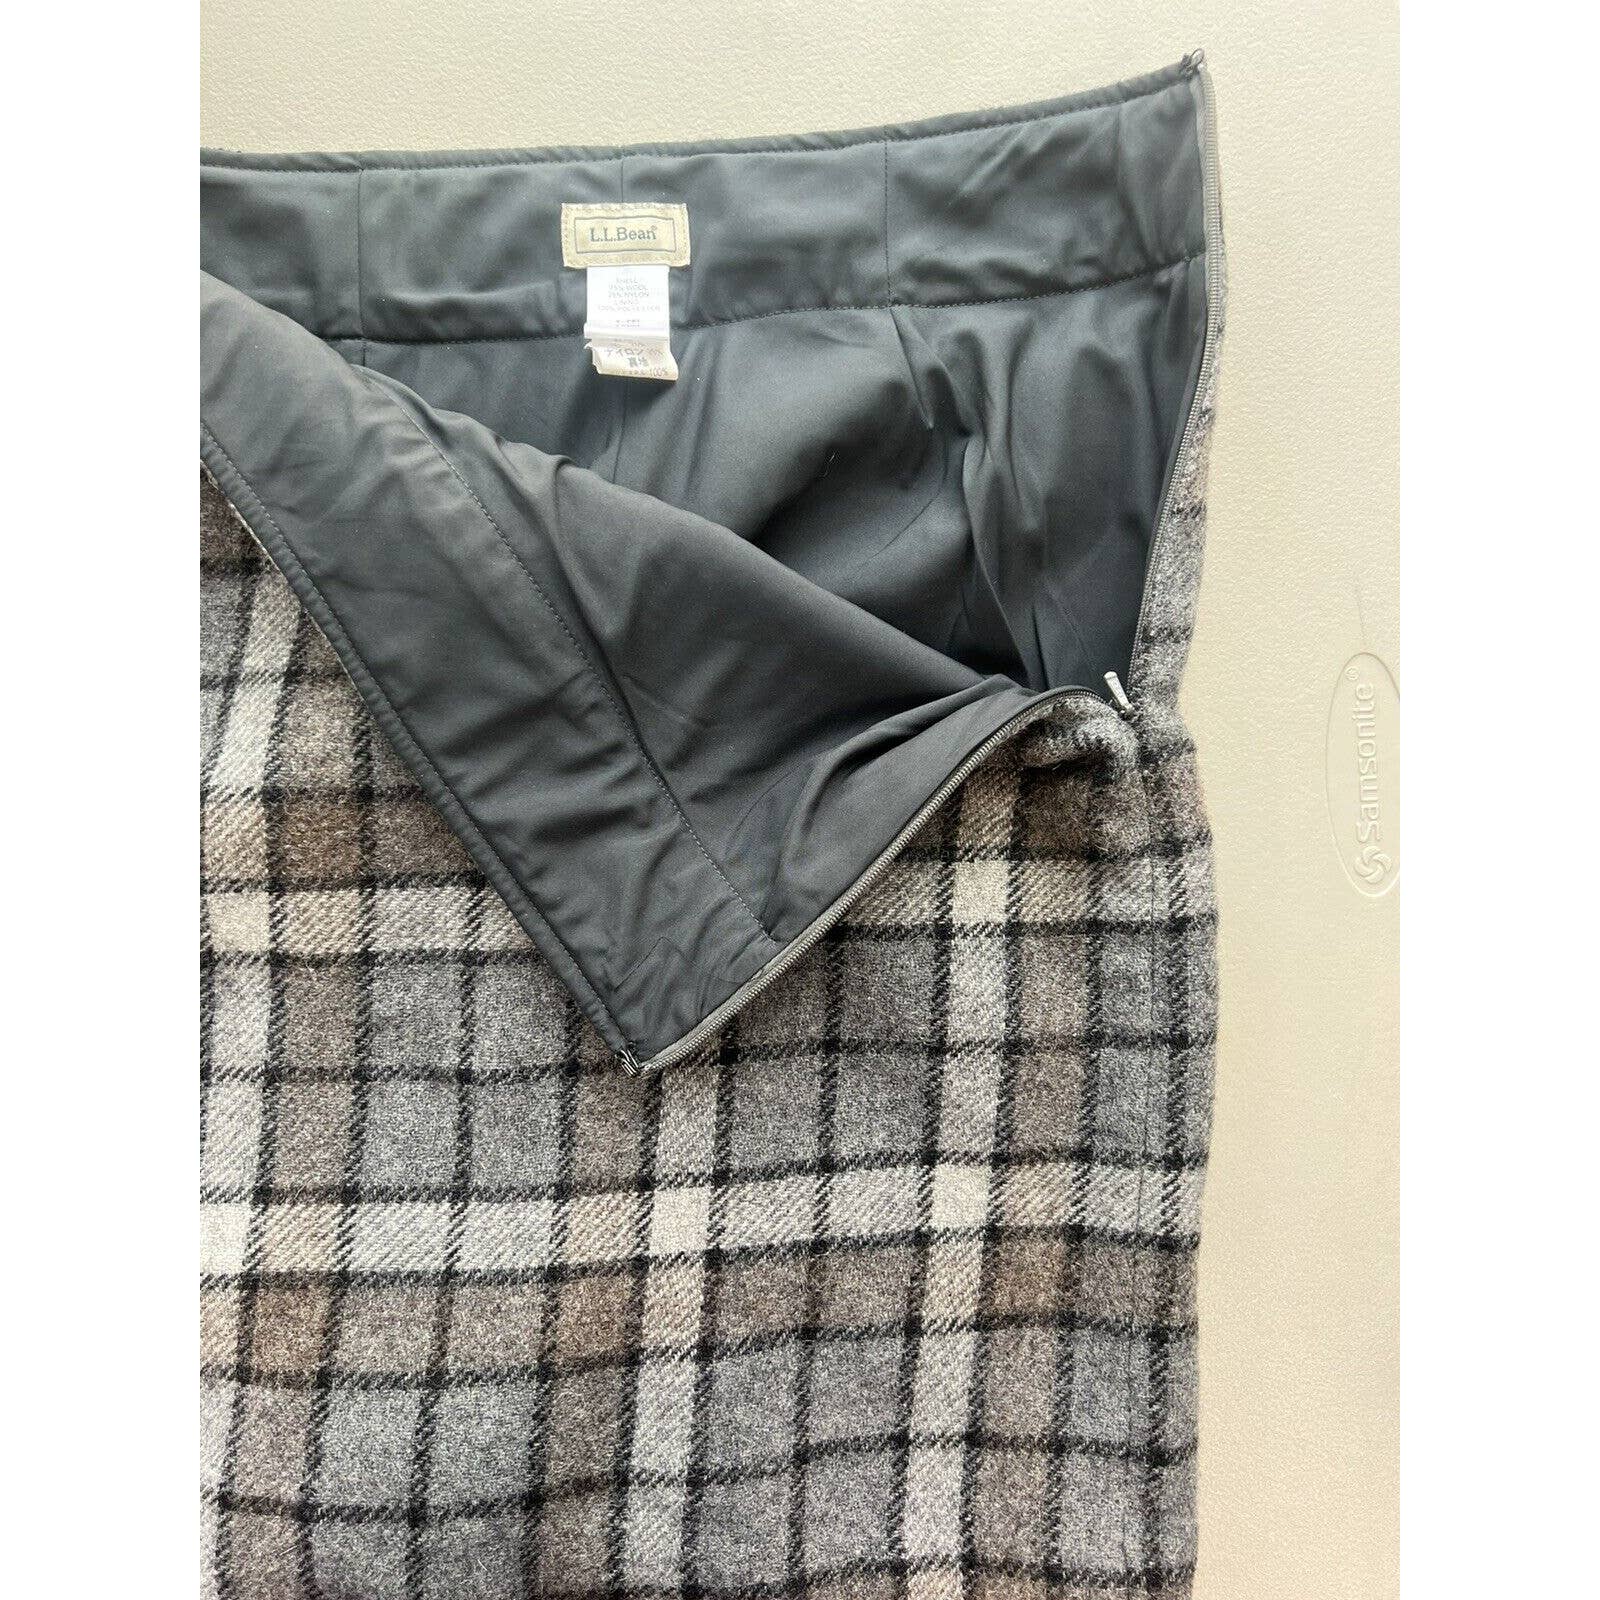 L.L. Bean Skirt Women’s Size 6 Petite Wool Blend Lined Gray And Brown Plaid